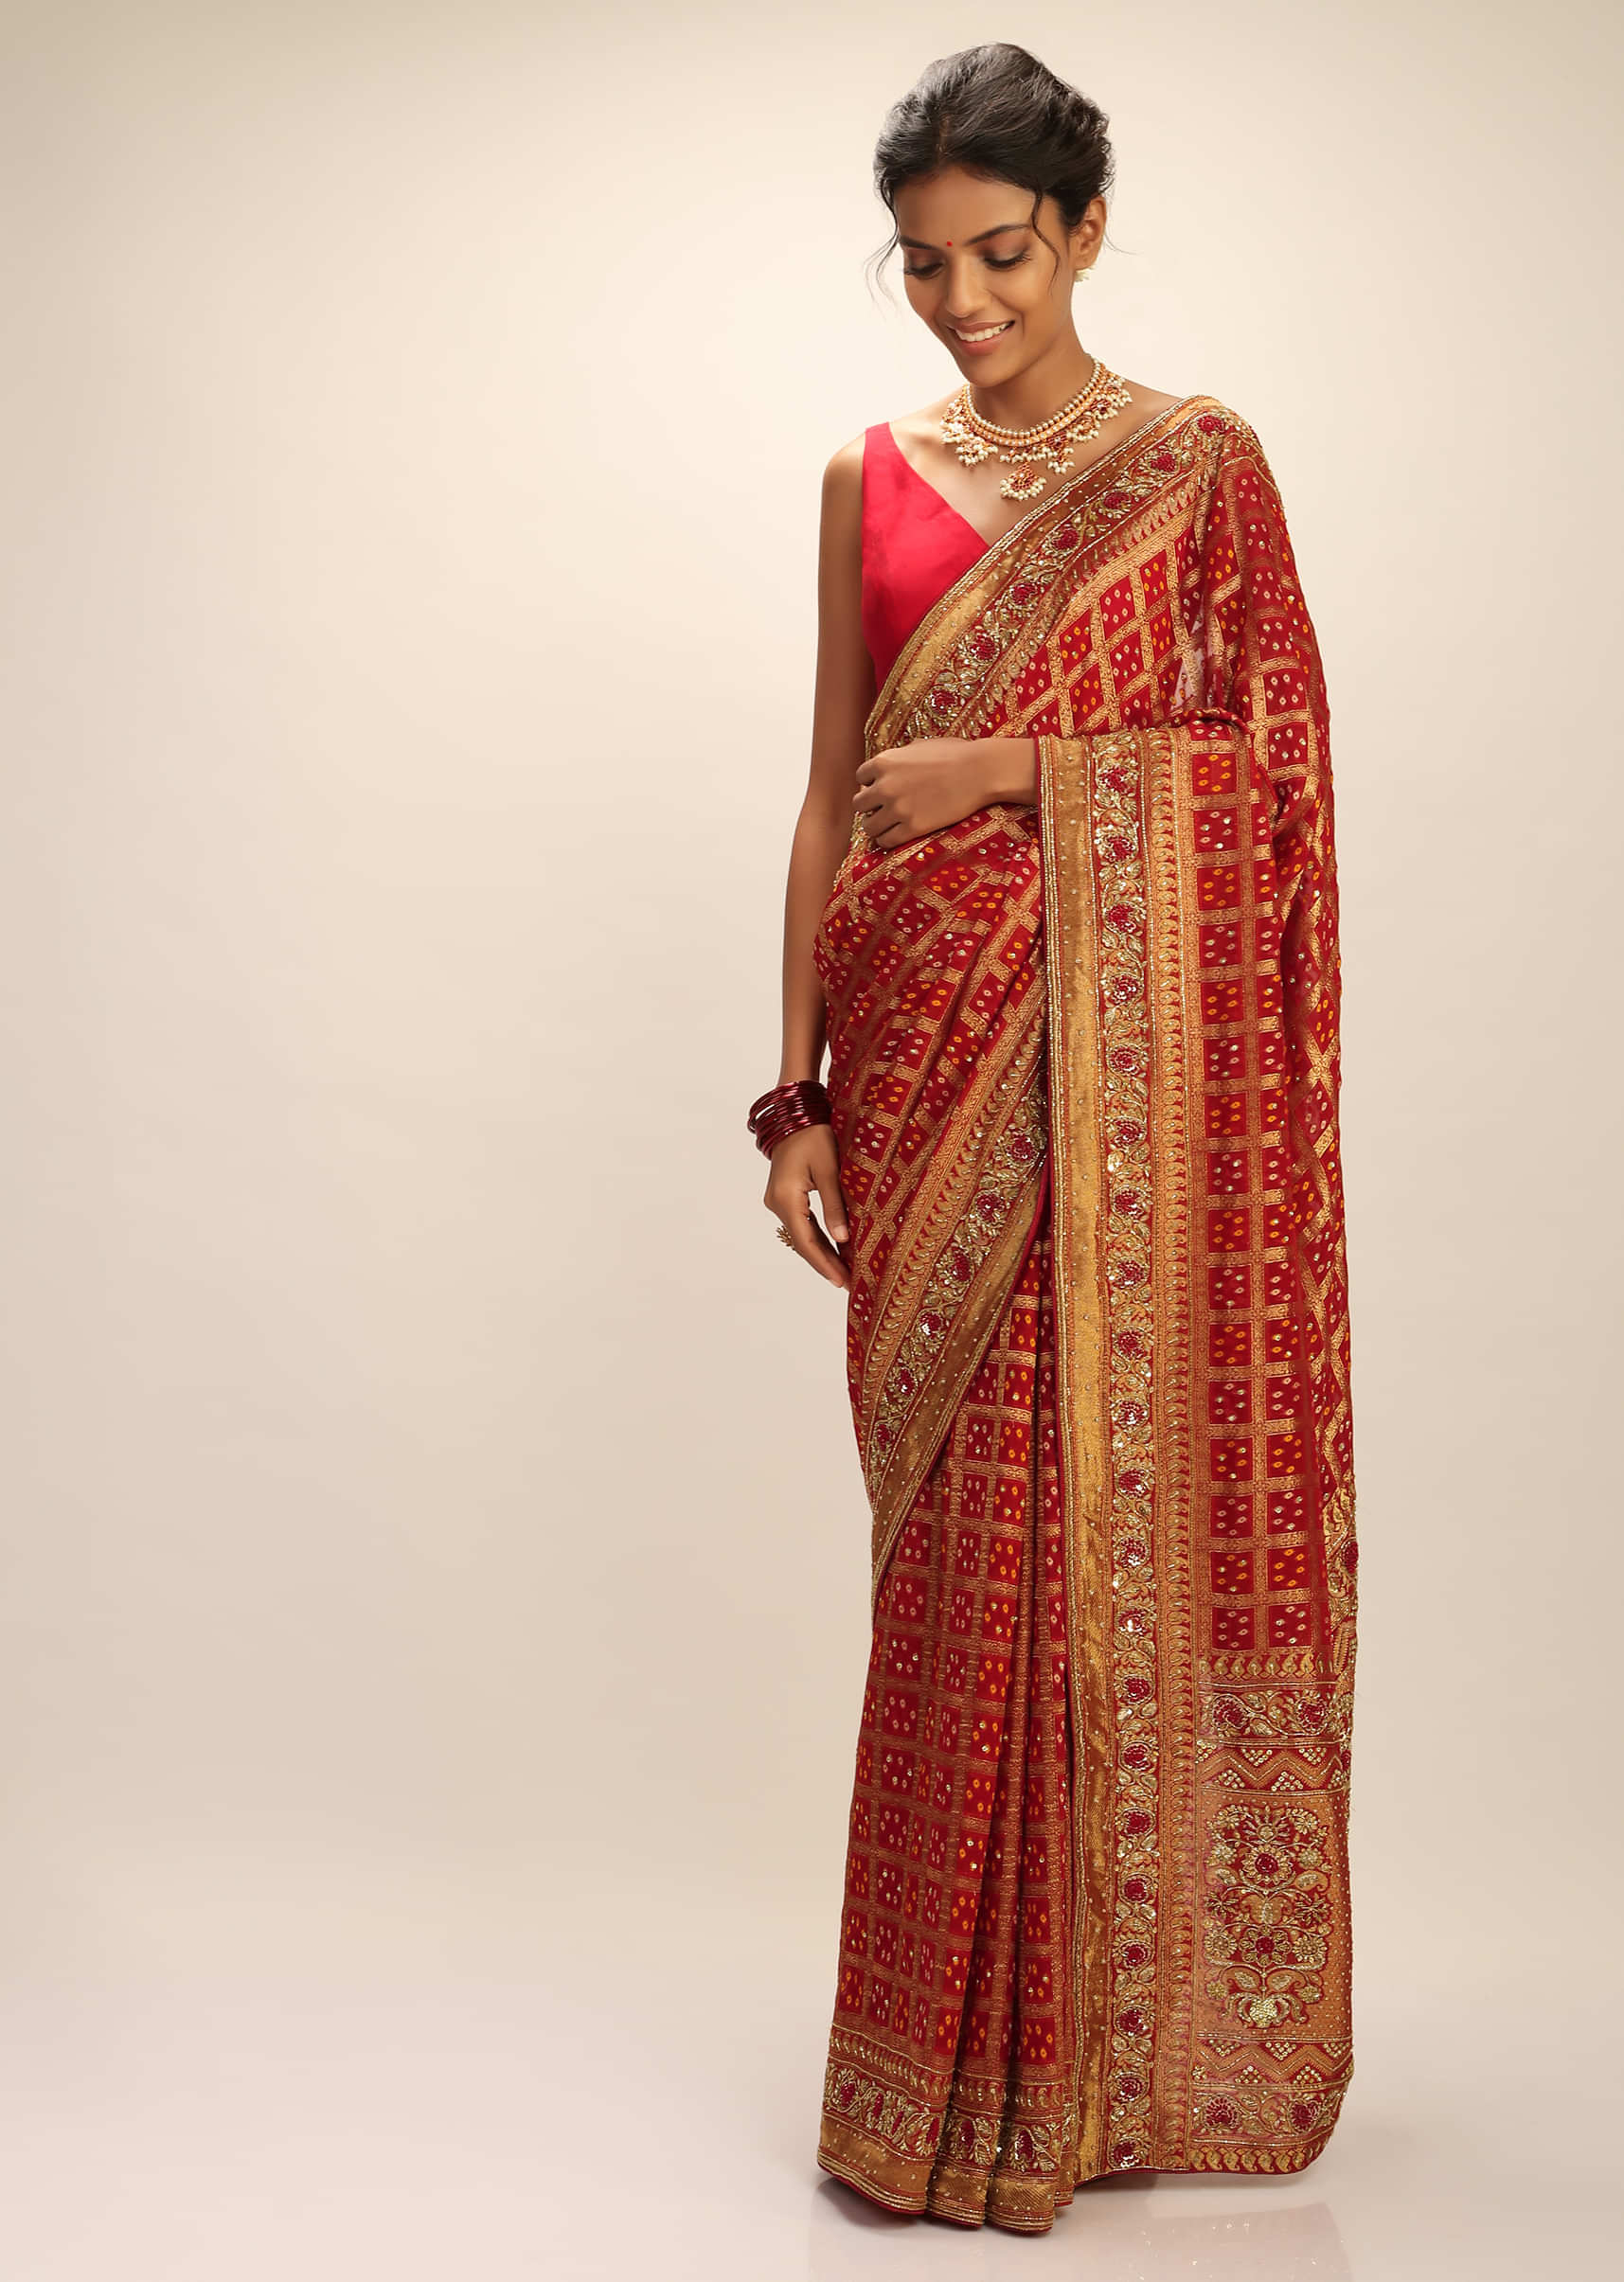 Chinese Red Banarasi Saree In Georgette With Woven Checks And Bandhani Design Along With Zardosi Work  